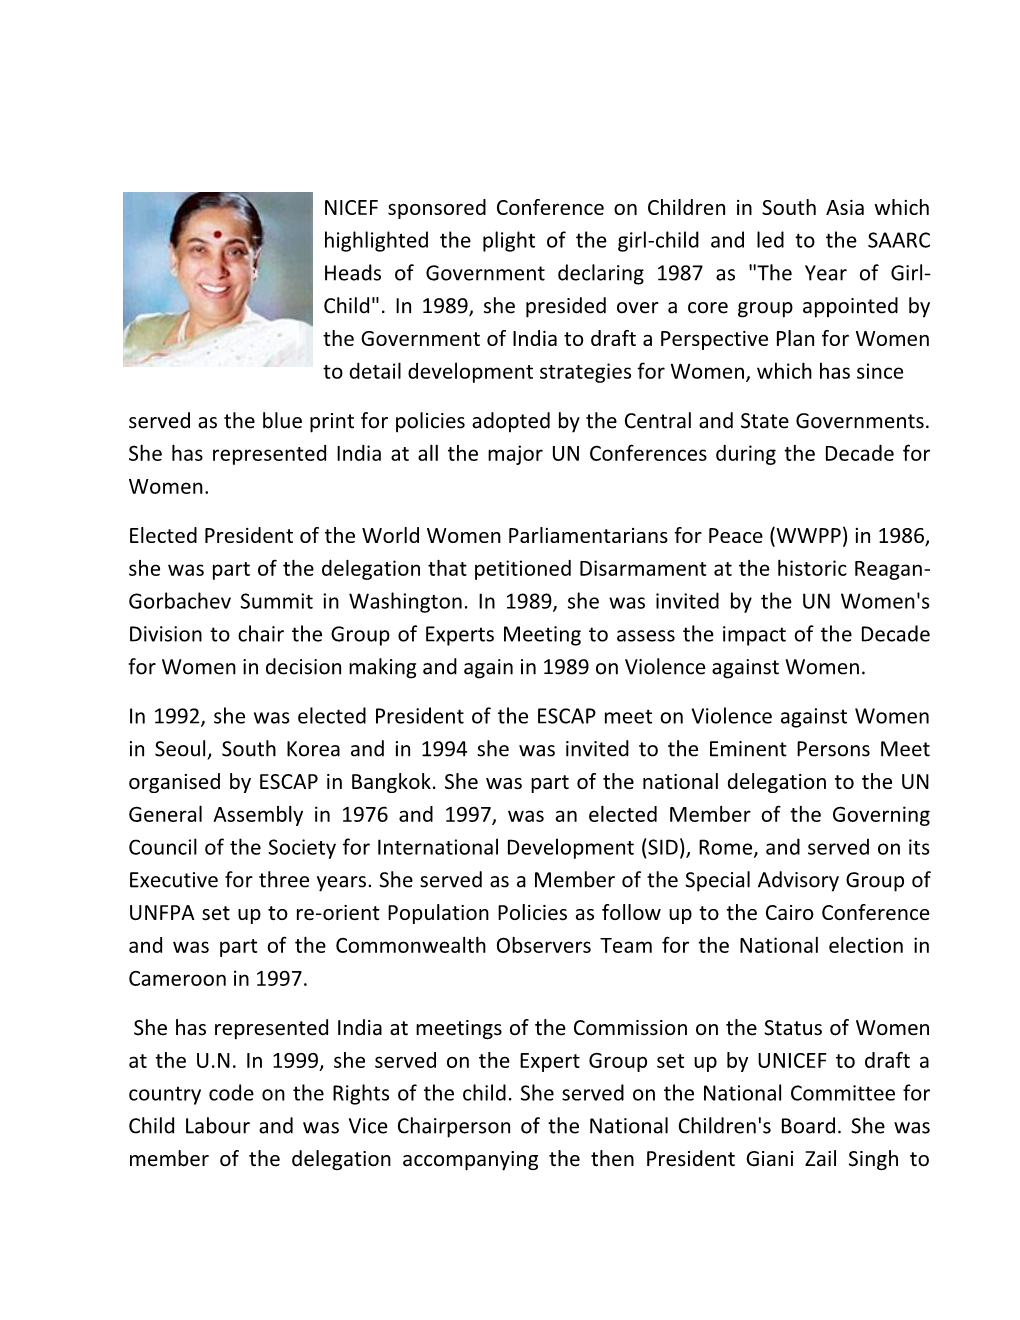 NICEF Sponsored Conference on Children in South Asia Which